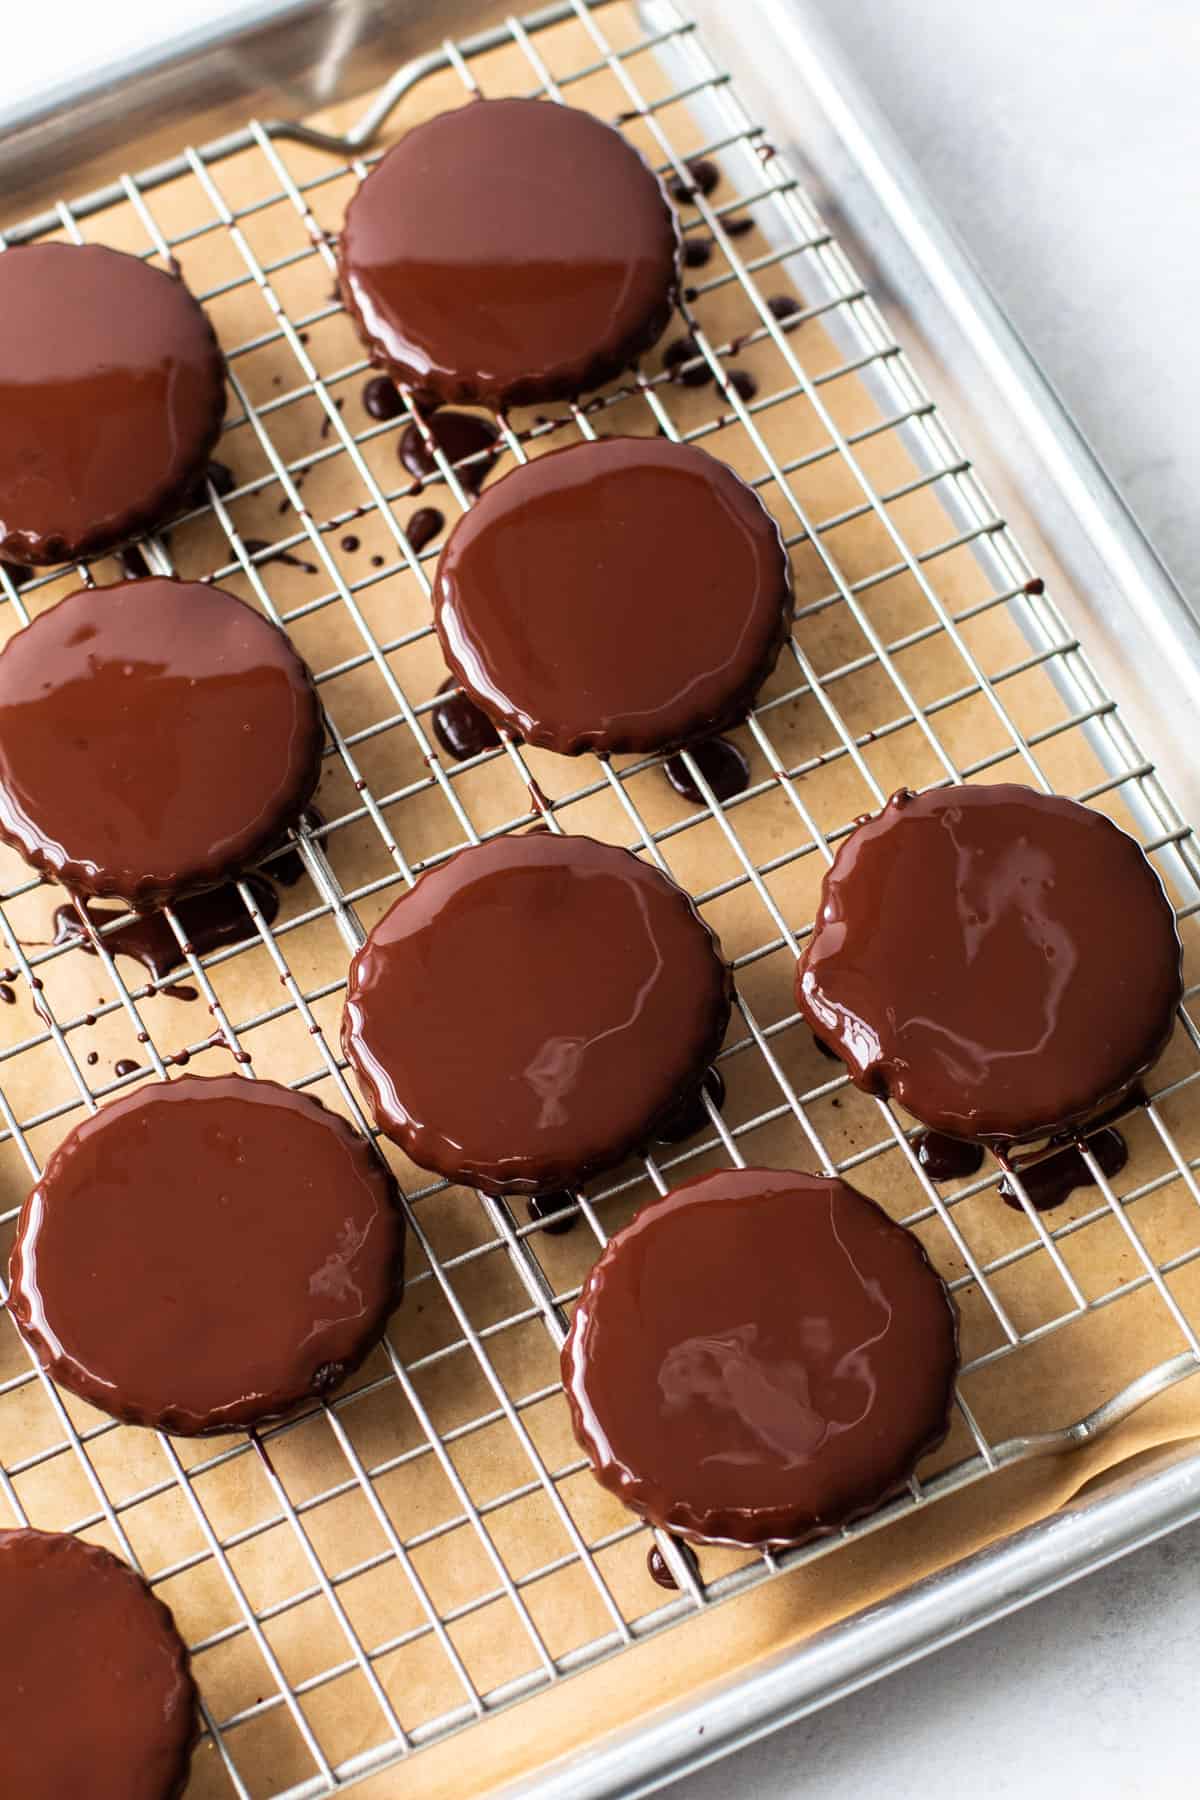 Chocolate glaze on top of thin mints.